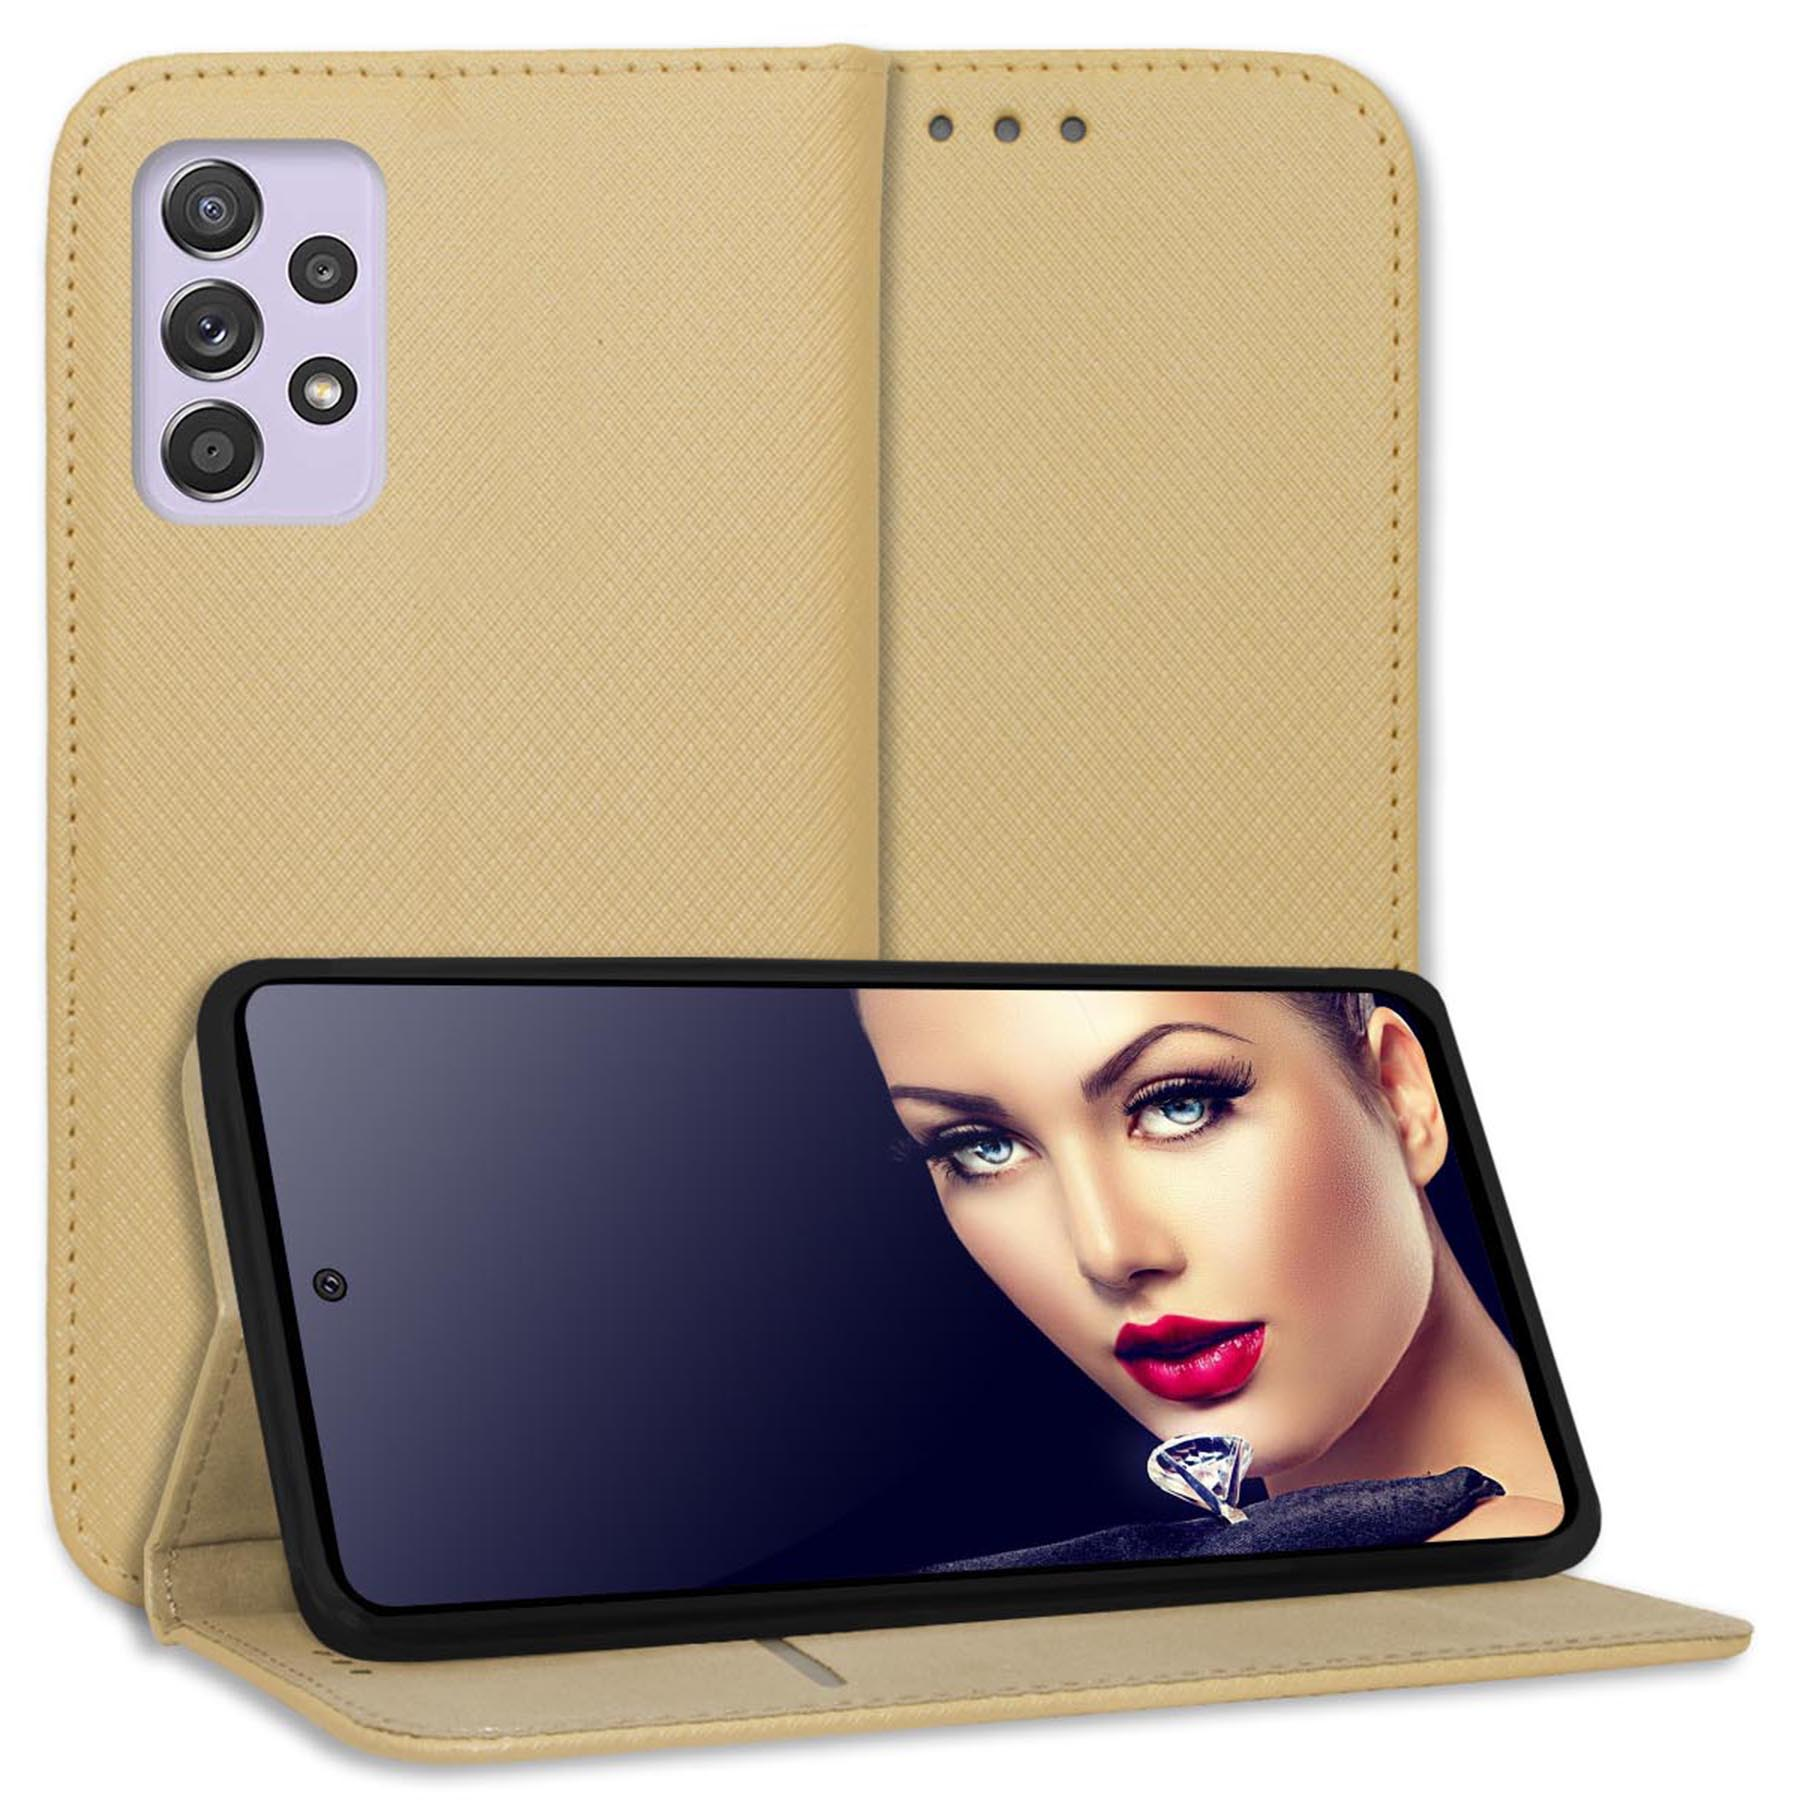 Smart A52 Samsung, Klapphülle, Gold 4G, MORE Magnet ENERGY MTB 5G, Galaxy 5G, A52S Bookcover, A52